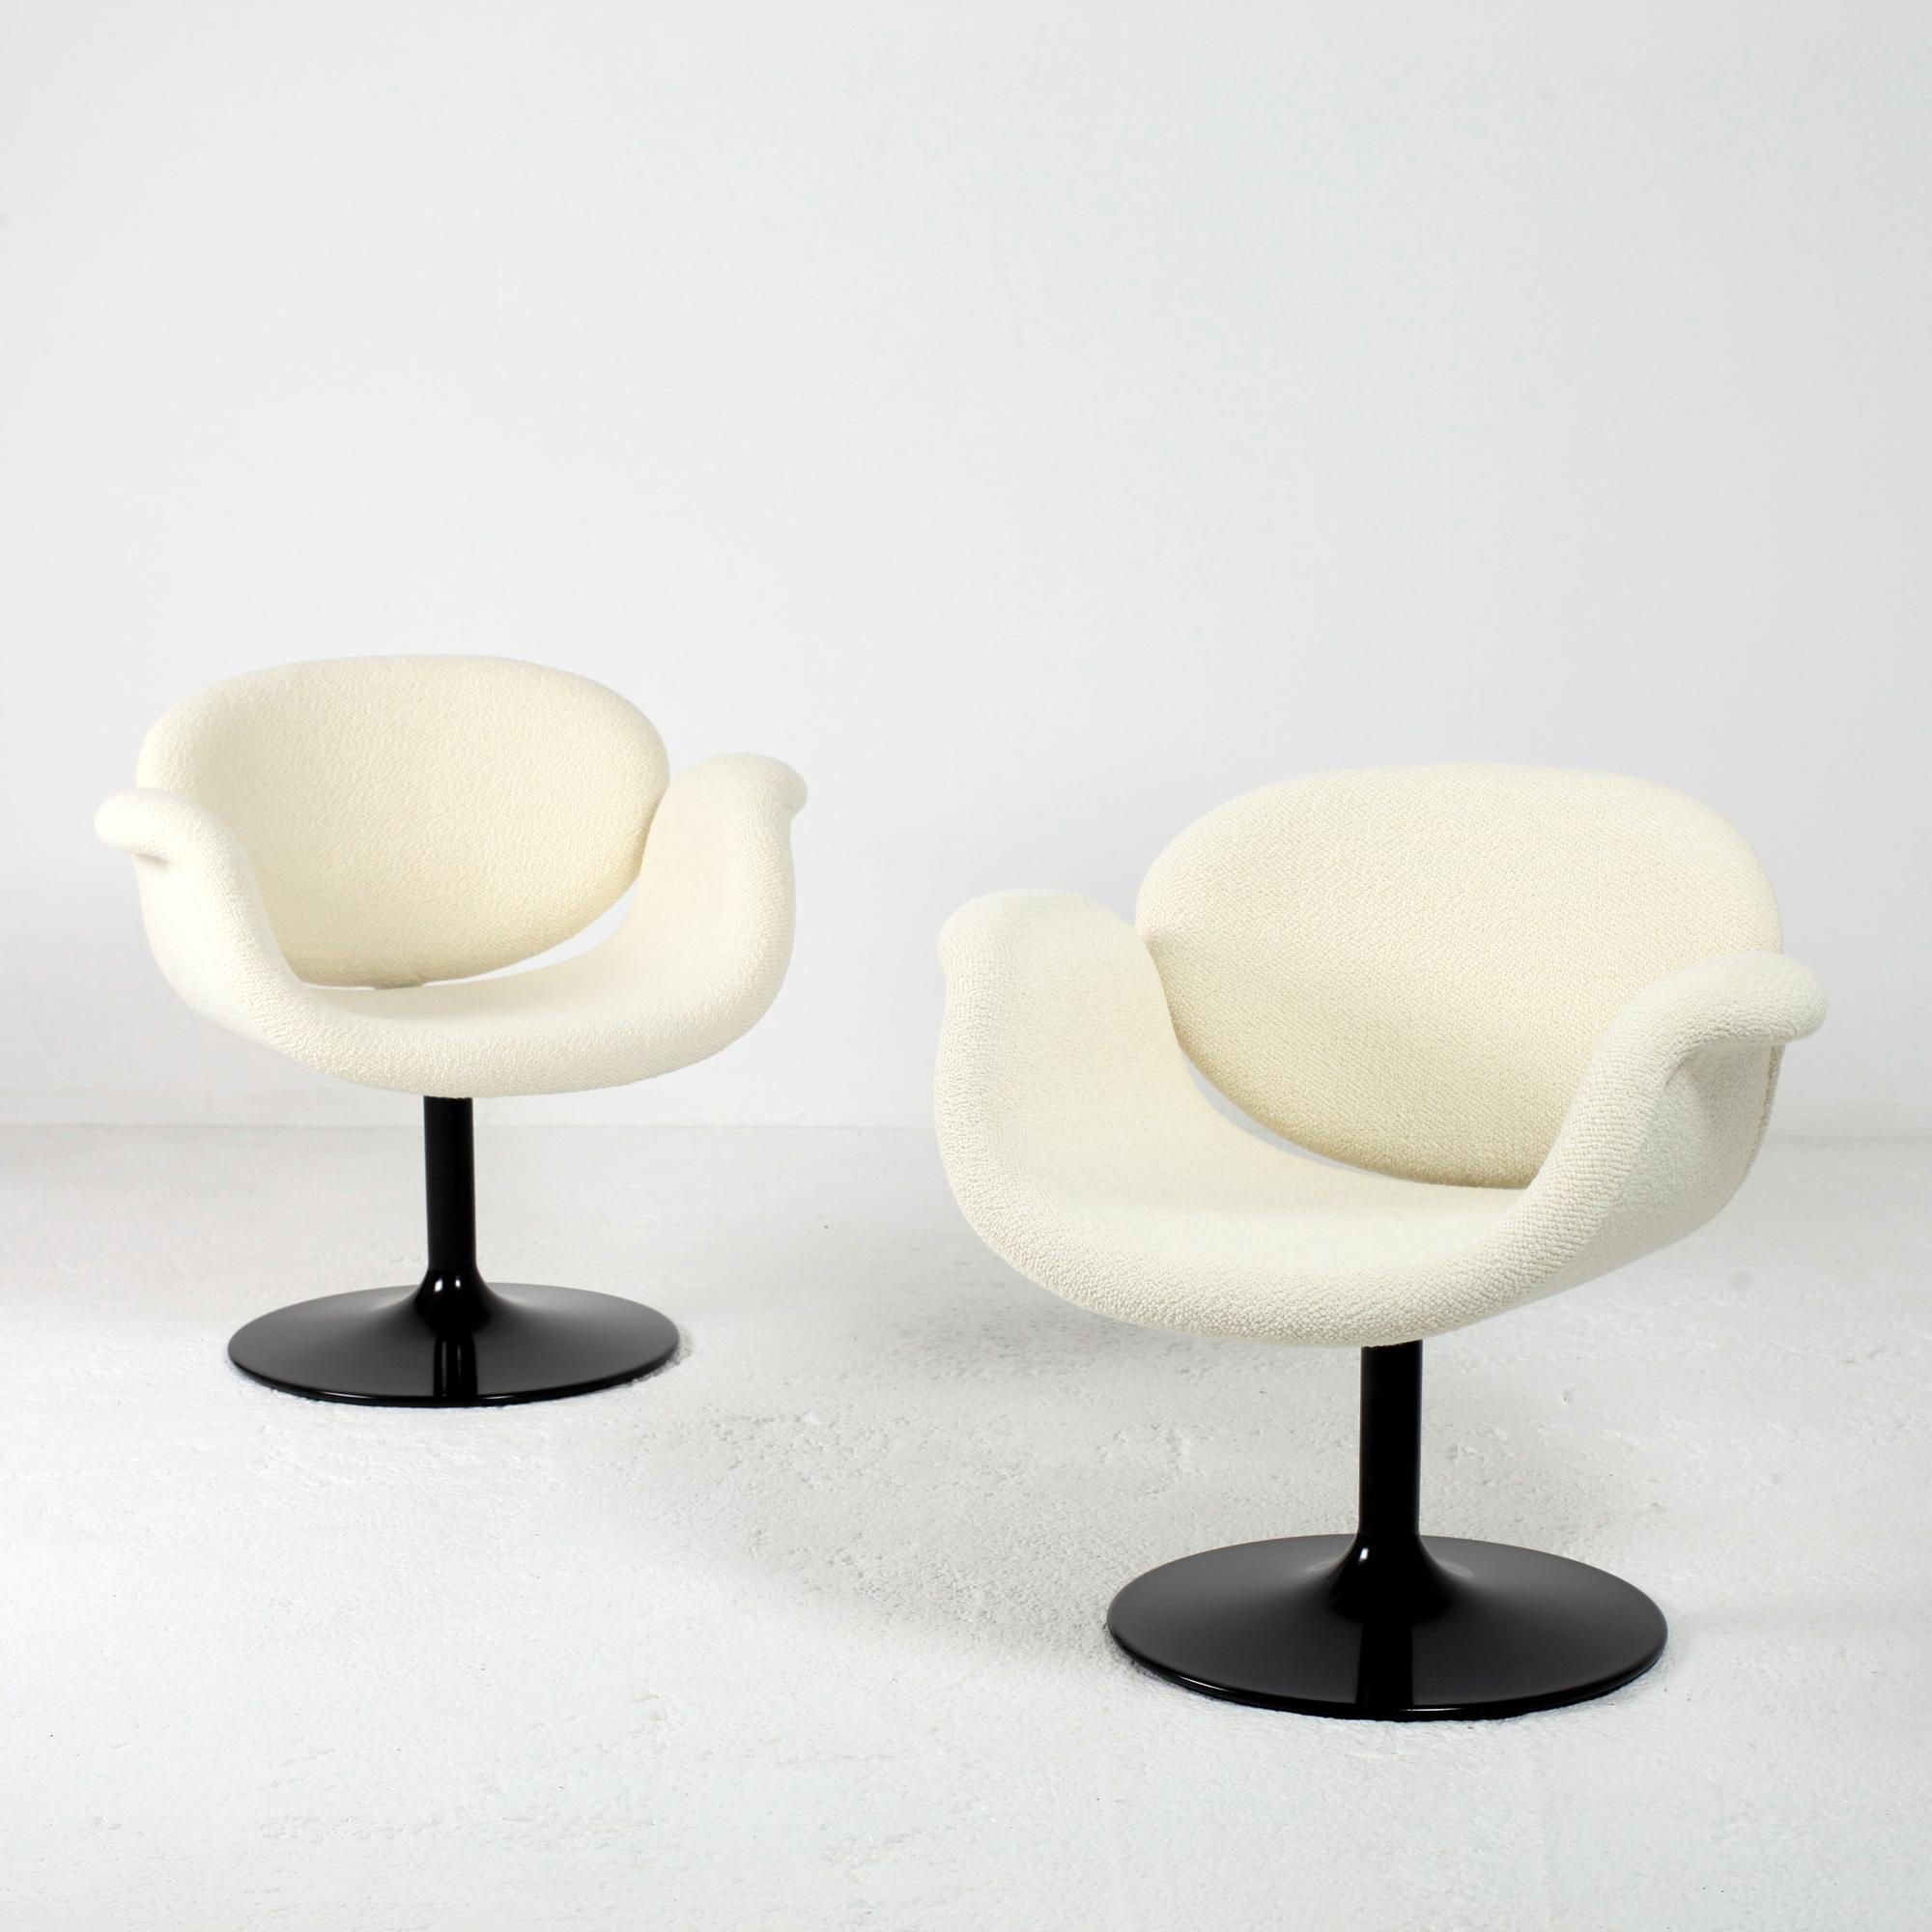 Pair of Little Tulip model armchairs created by Pierre Paulin in the 1960s and produced by Artifort. This model is a first edition and is no longer produced with this base.
Completely restored, the metal legs have been relacquered and the seats